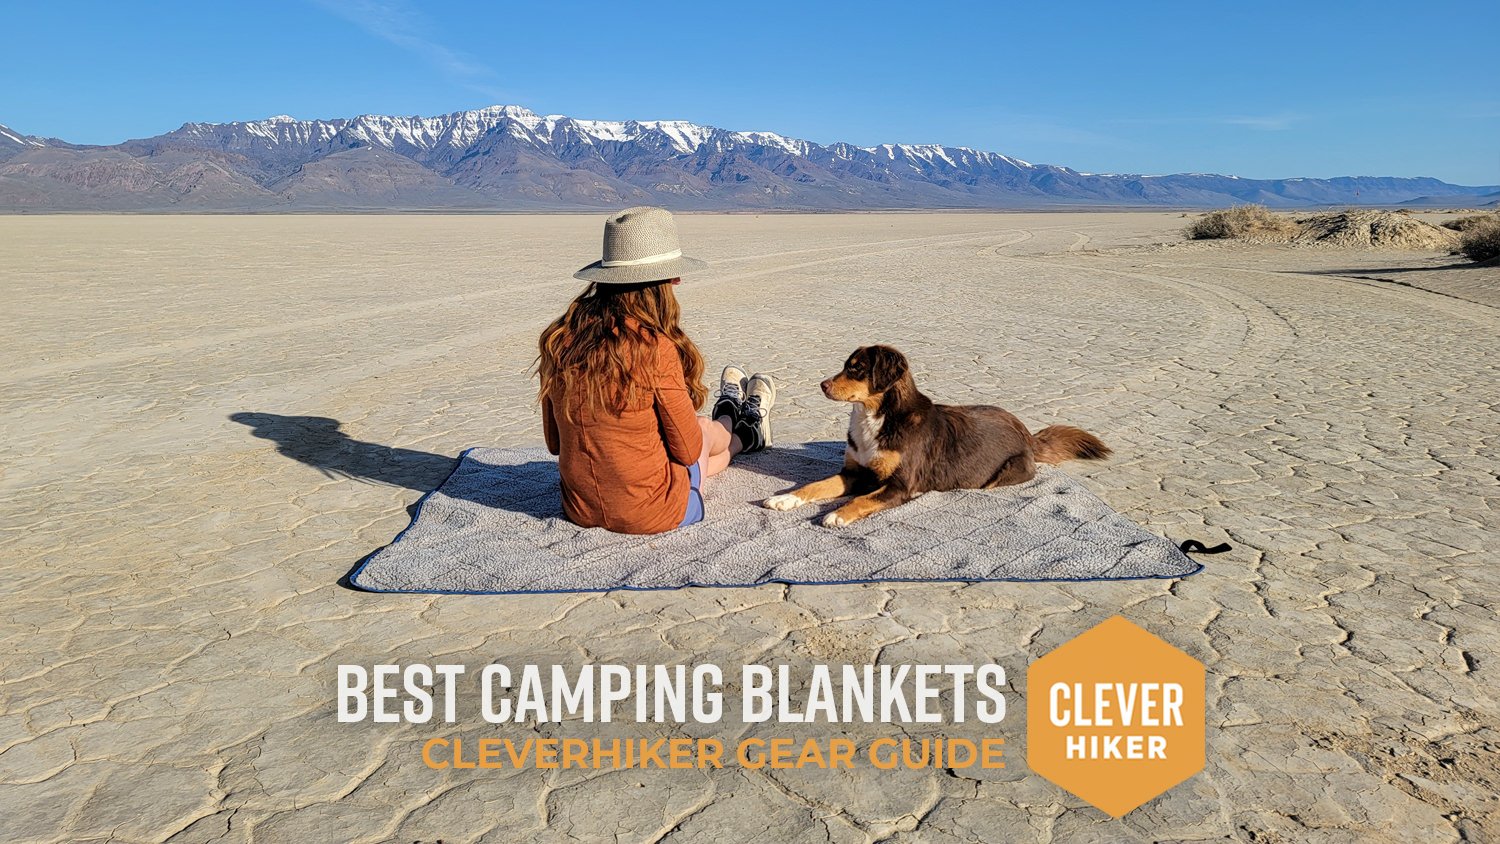 Yeti Lowlands Blanket Review for Camping 